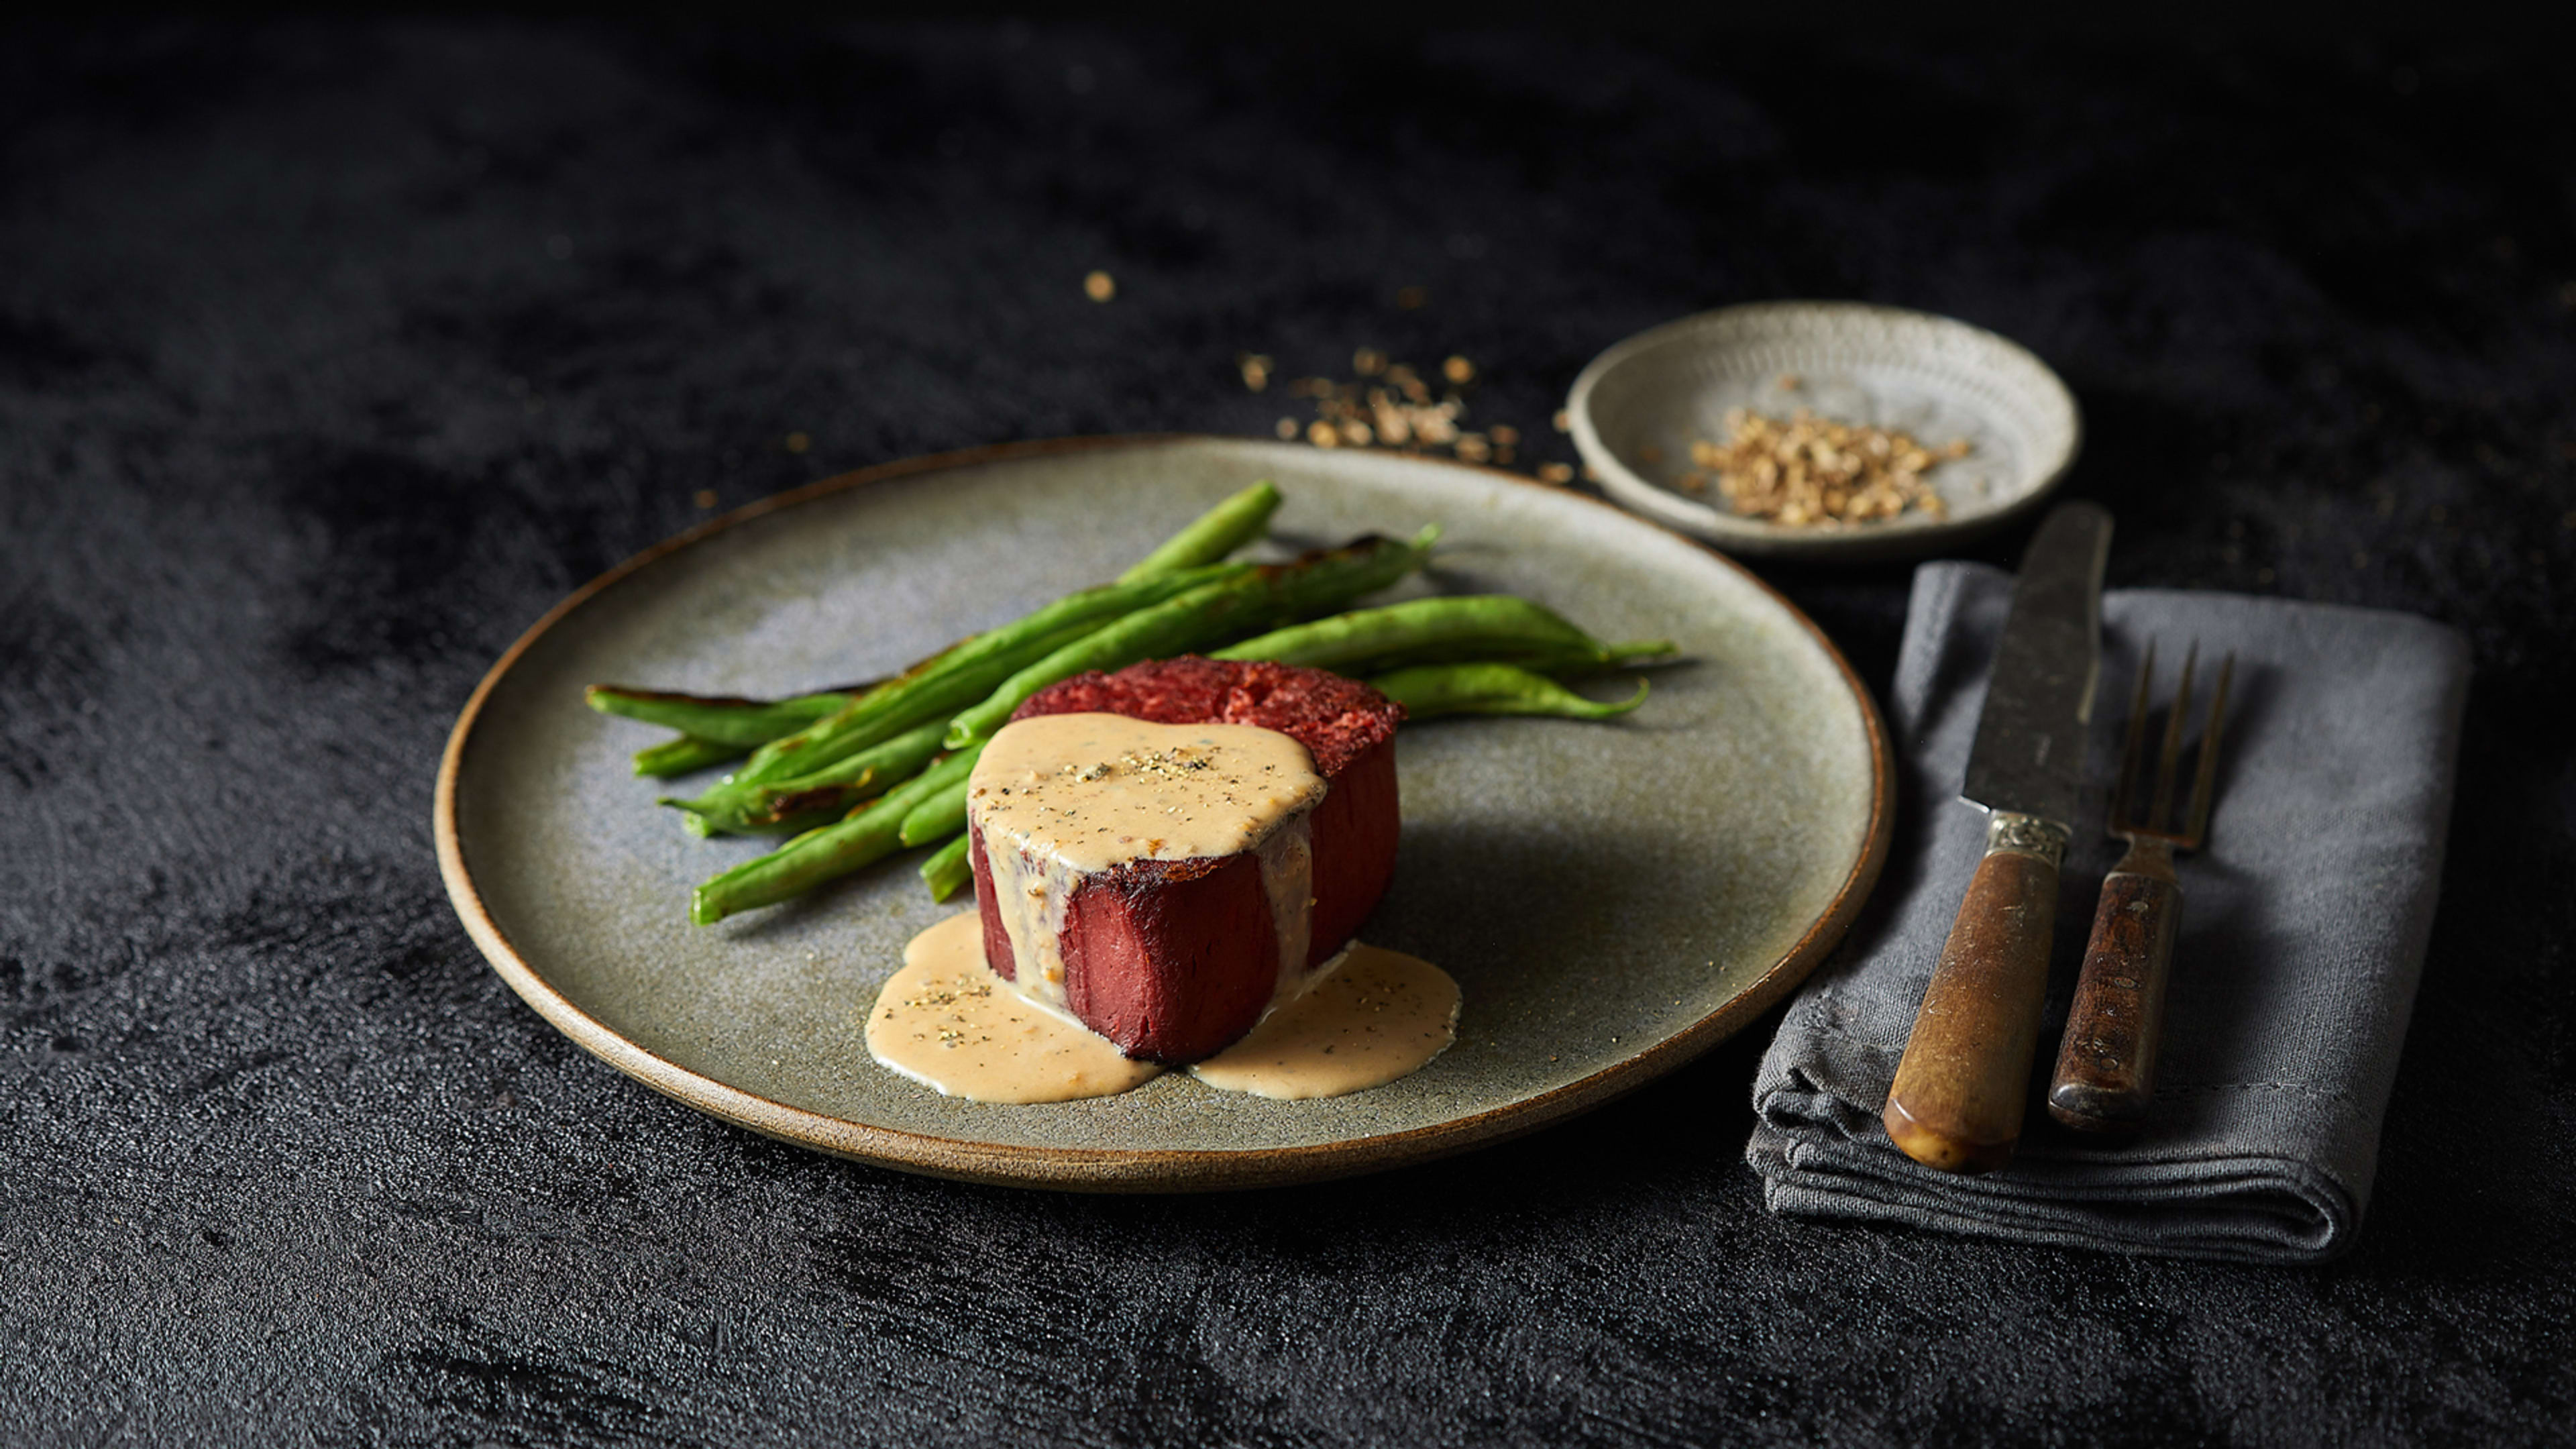 These plant-based steaks come out of a 3D printer